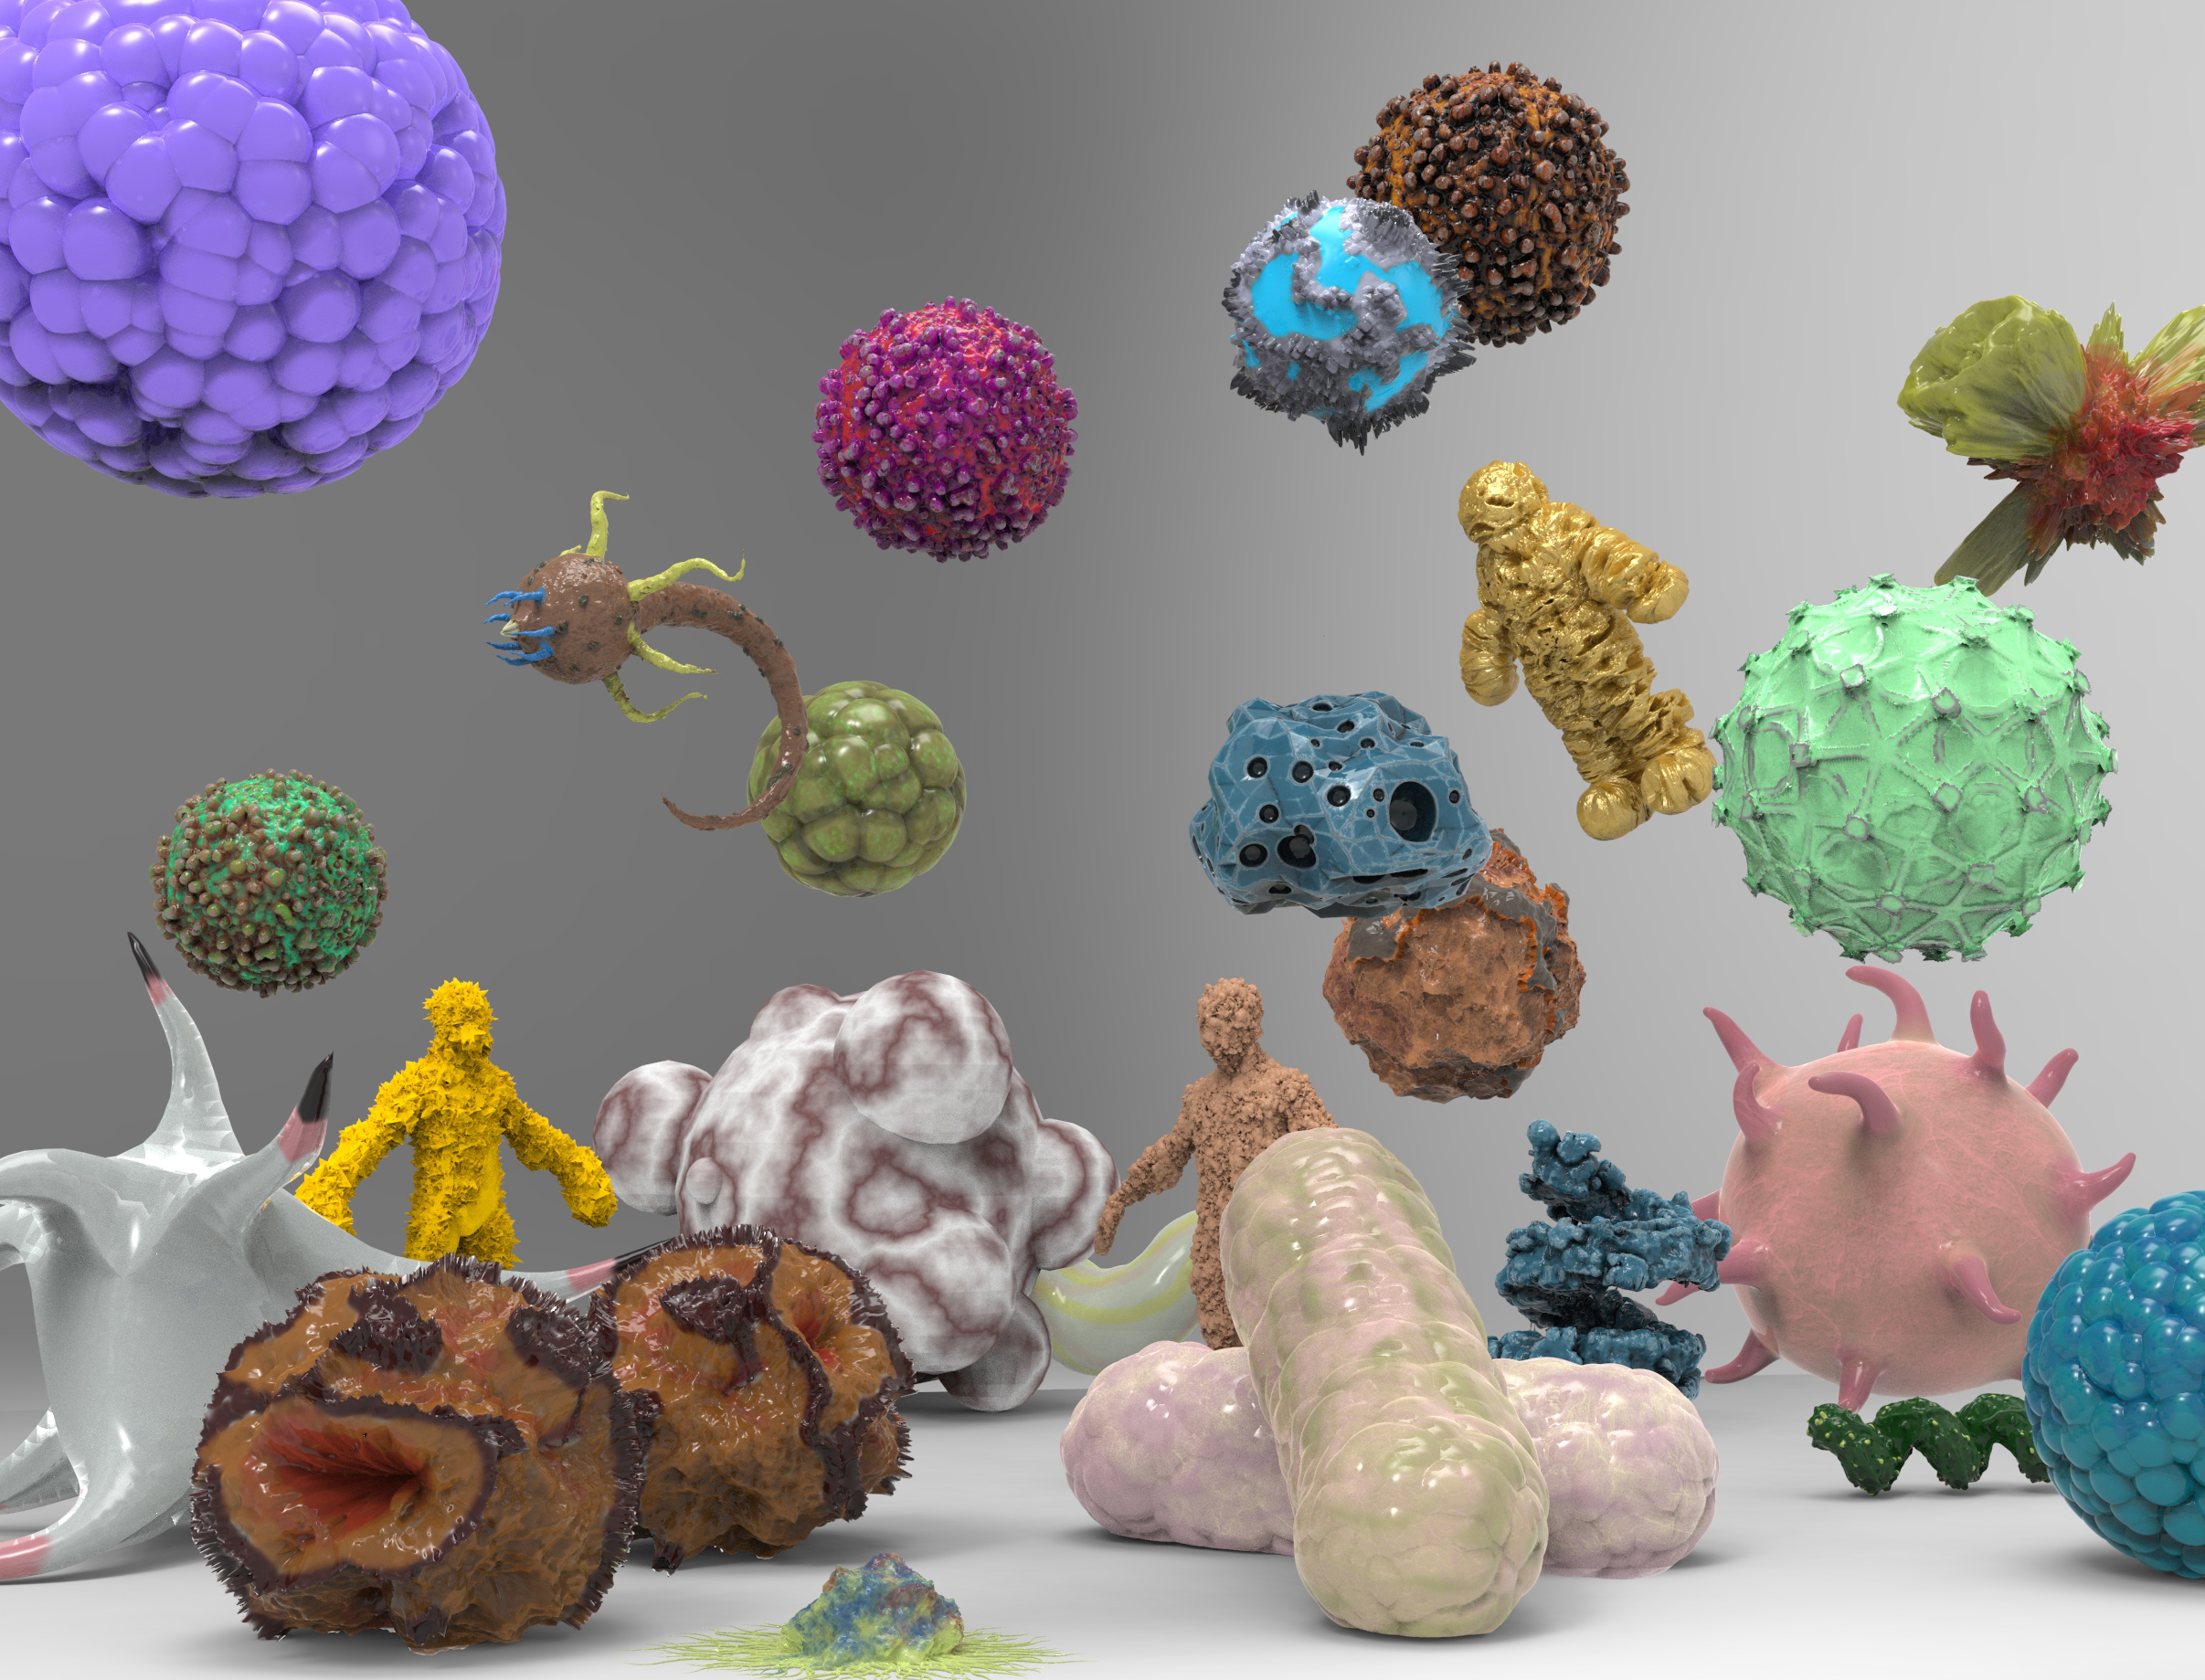 A computer generated image of microbes floating through the air.